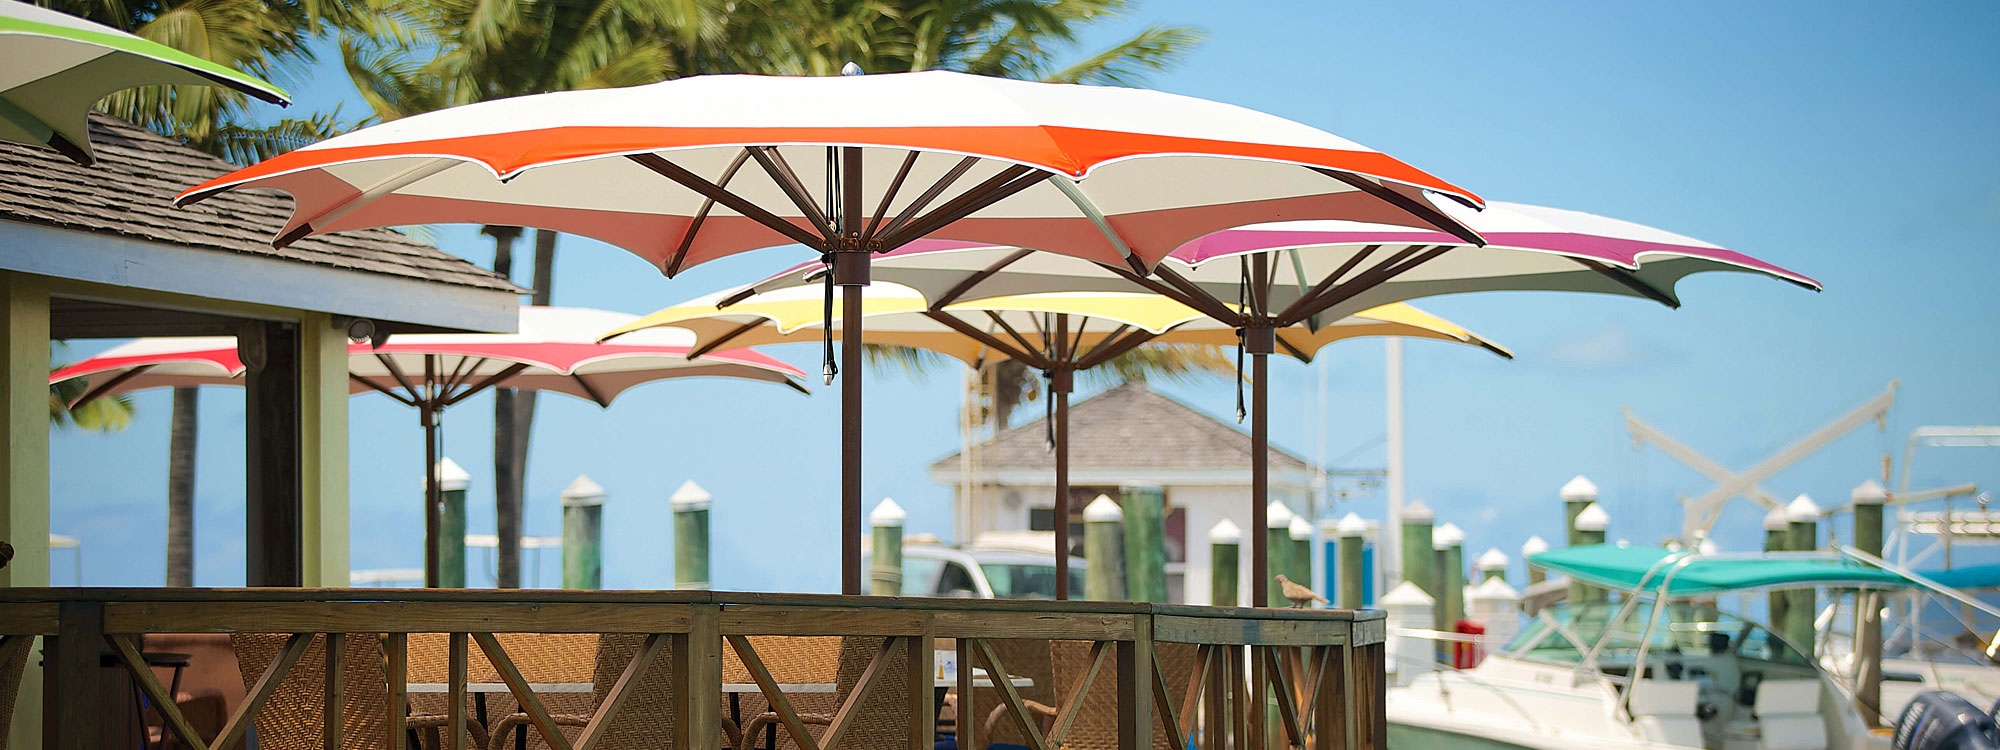 Image of octagonal Ocean Master Max center mast parasols with Aluma-Teak mast and ribs and multi-colored canopies, shown on marina restaurant outdoor deck